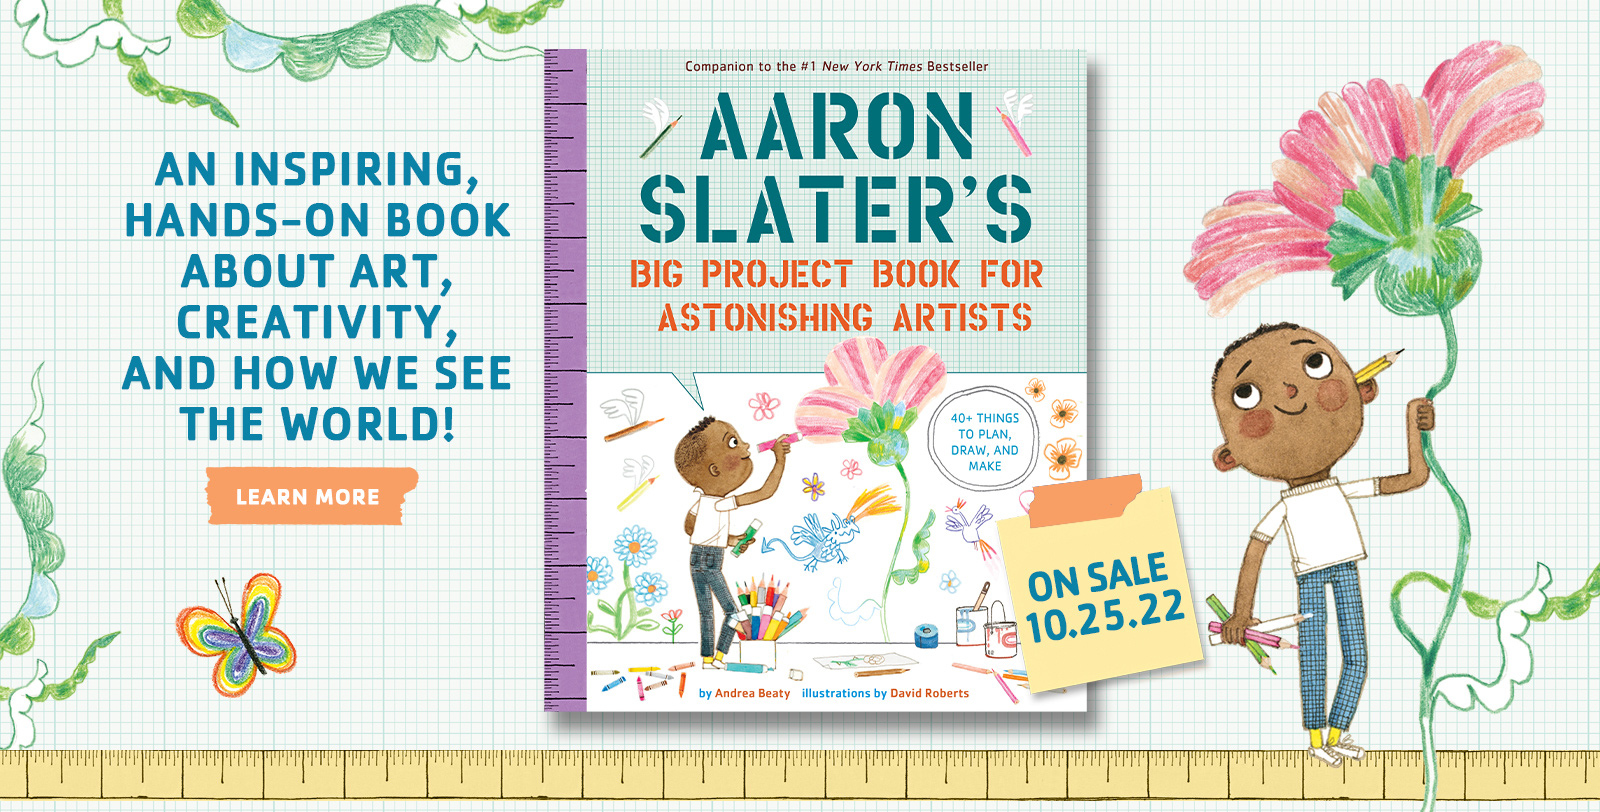 Aaron Slater's Big Project Book